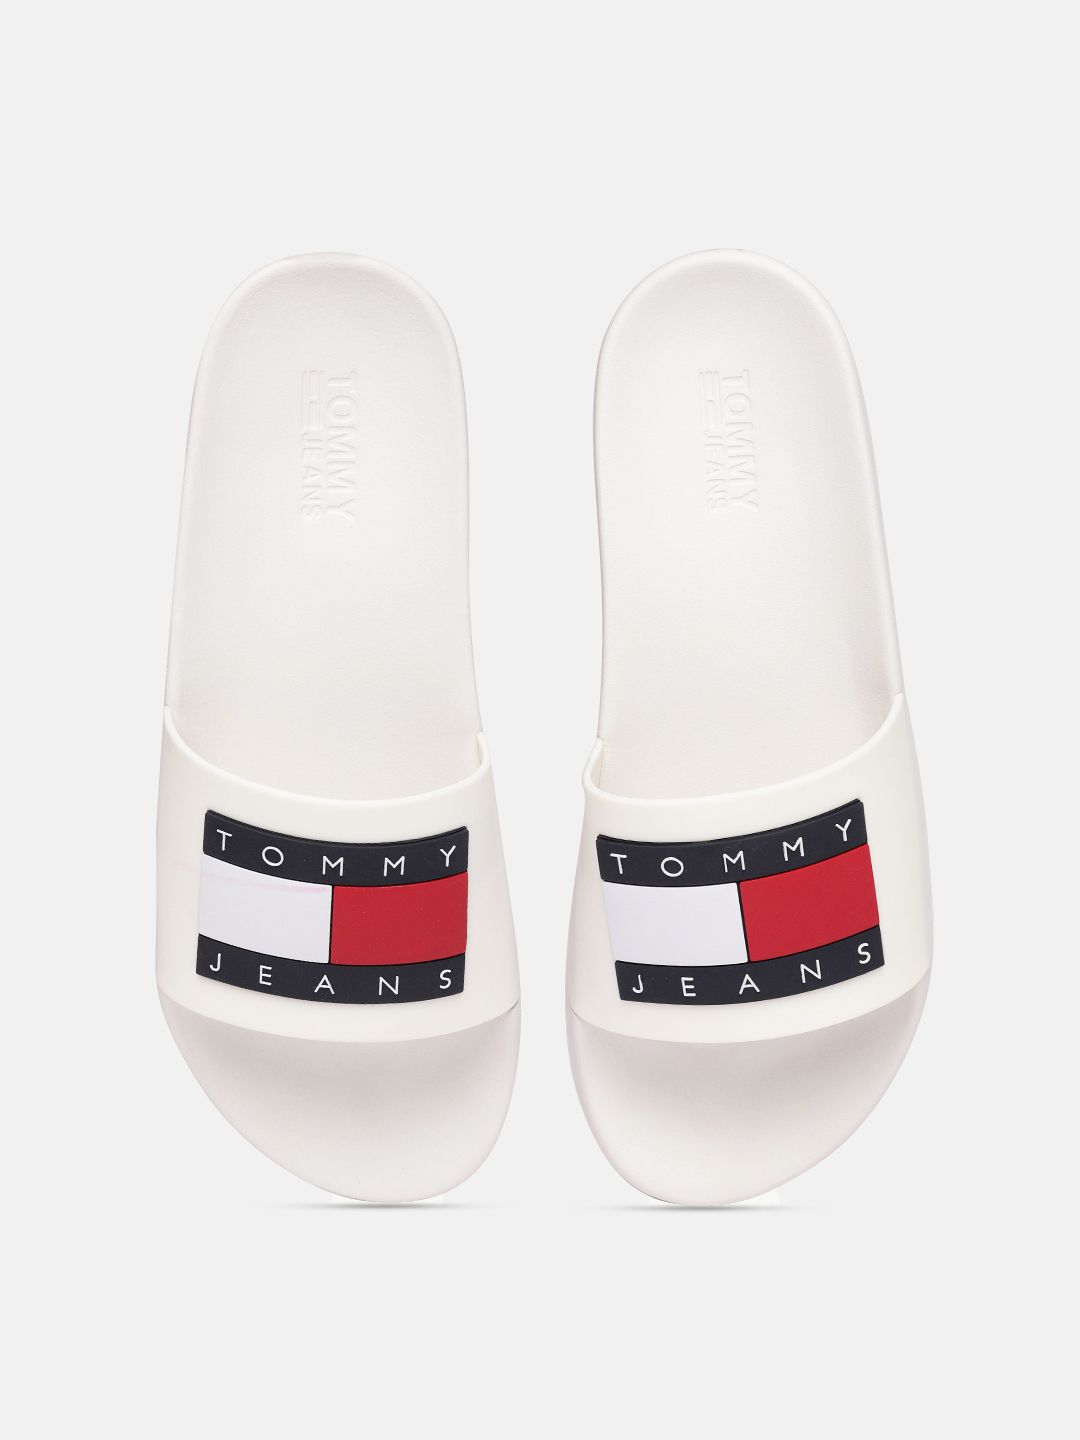 Tommy Hilfiger Women White Printed Sliders Price in India